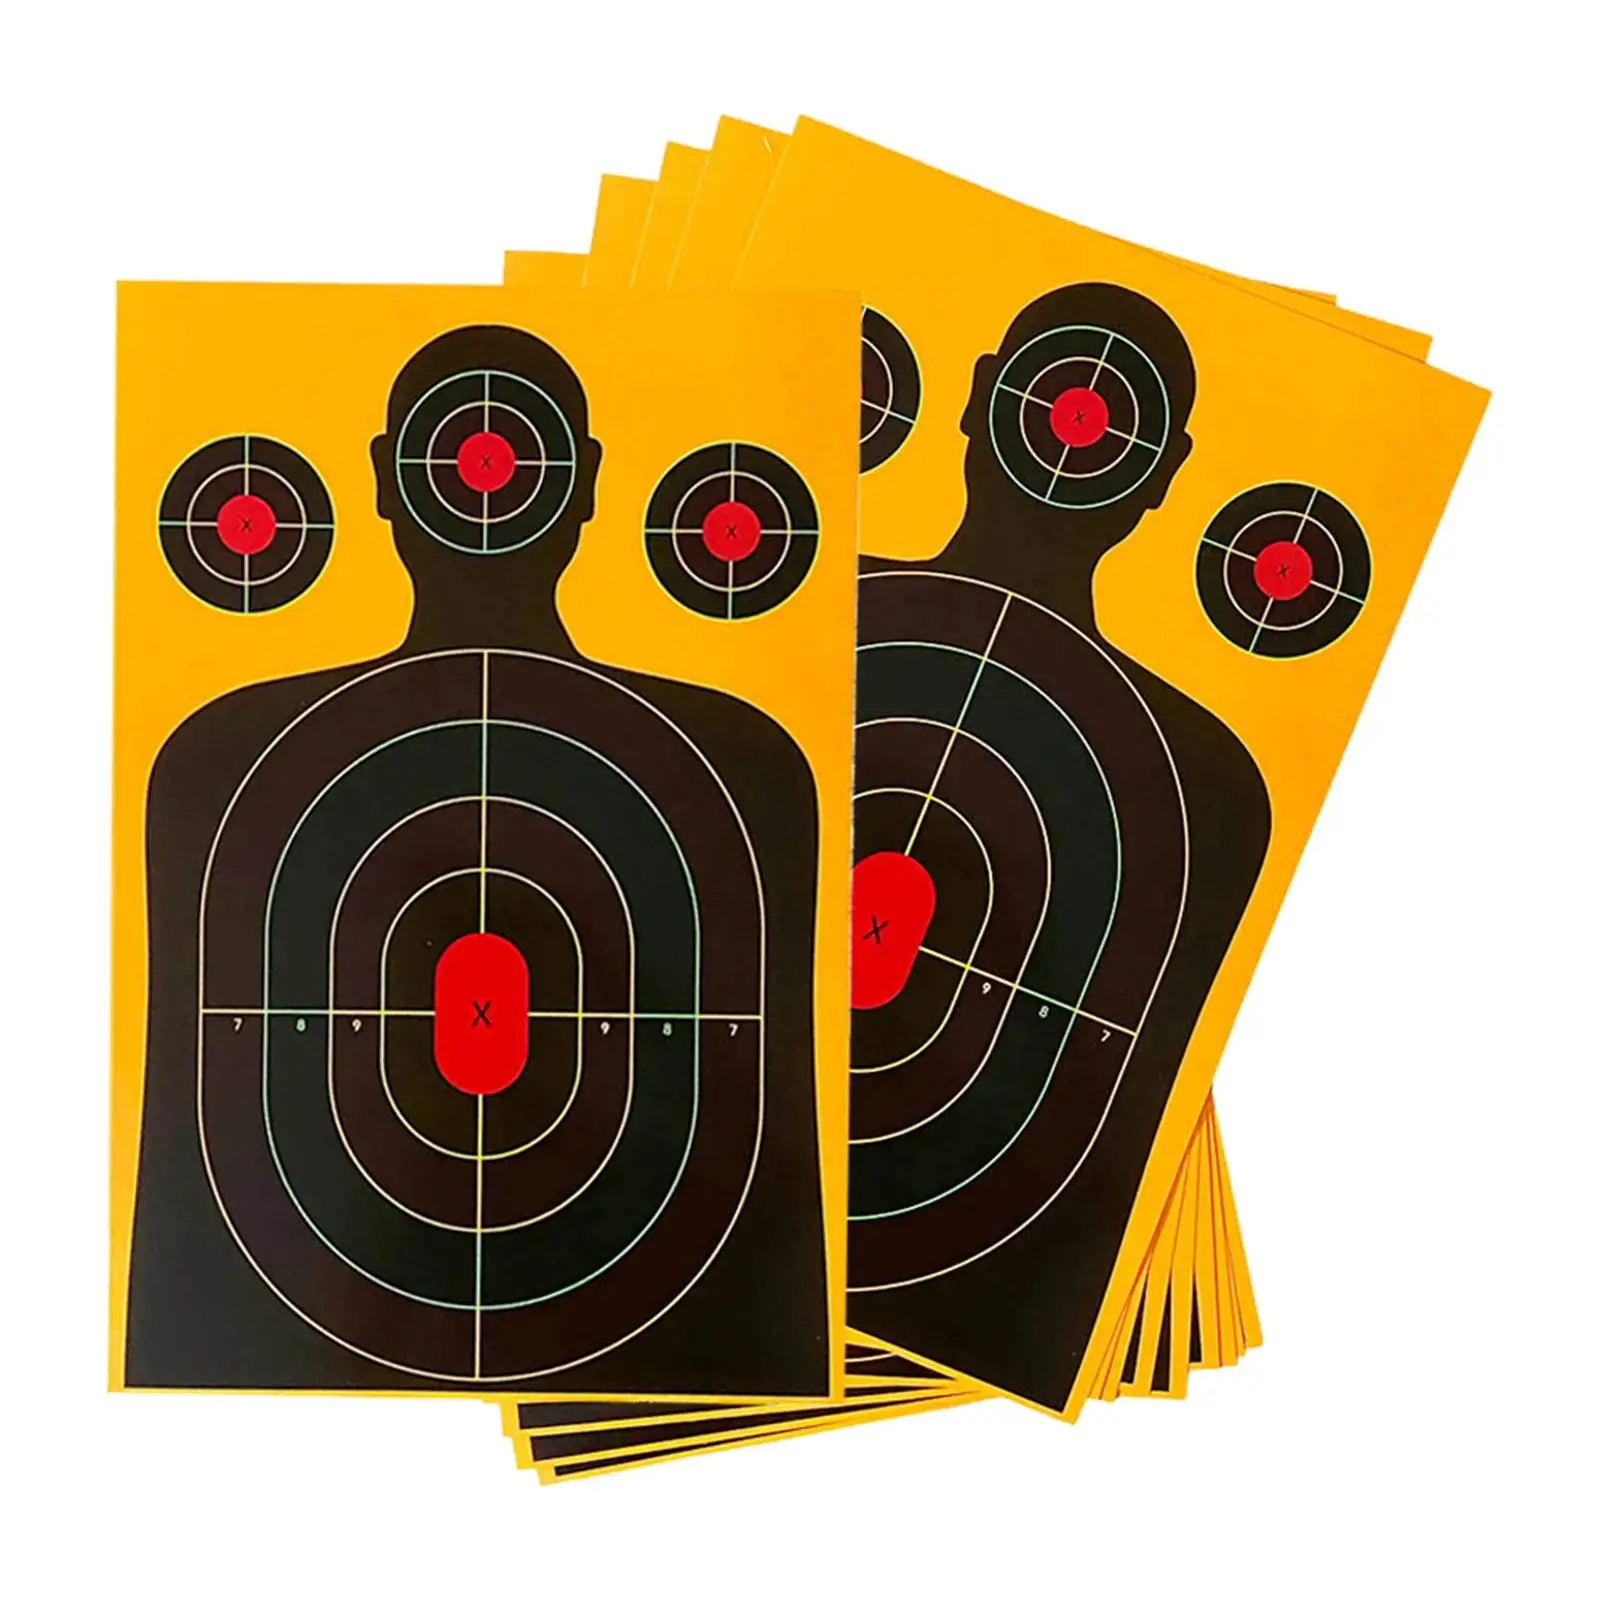 10x Silhouette Target Hunting Practice Highly Visible Durable Sturdy without